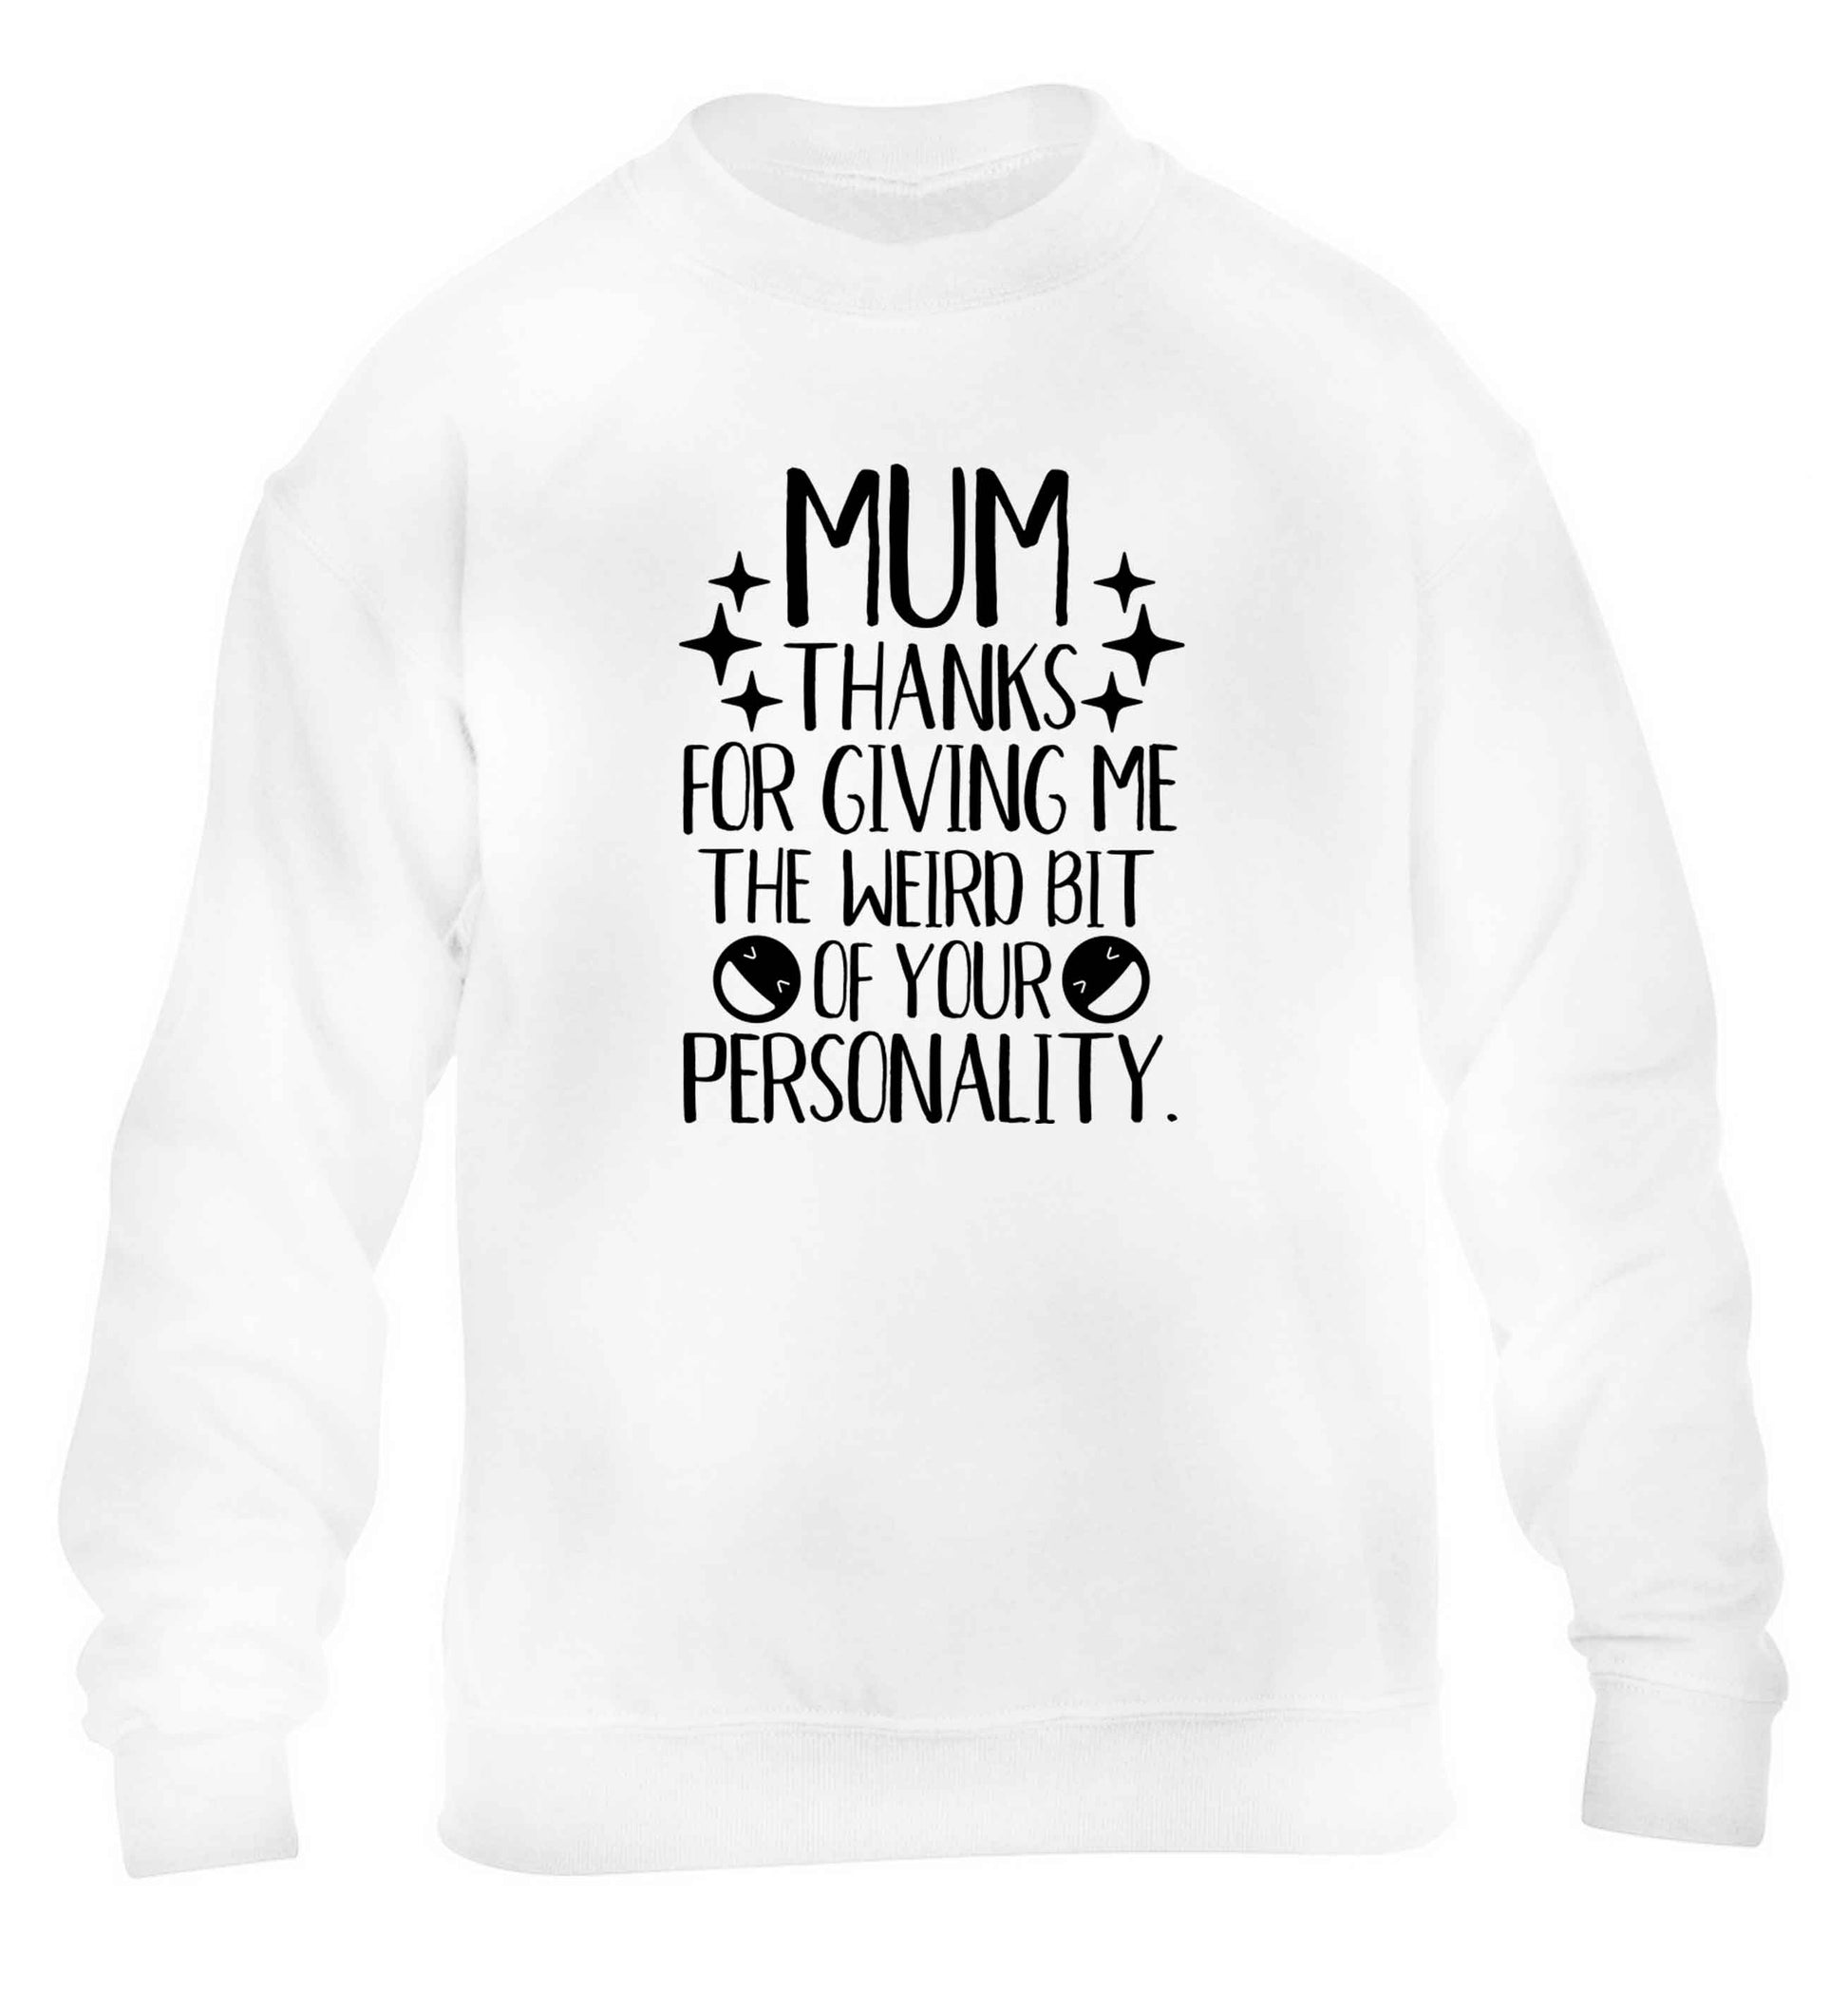 Mum thanks for giving me the weird bit of your personality children's white sweater 12-13 Years